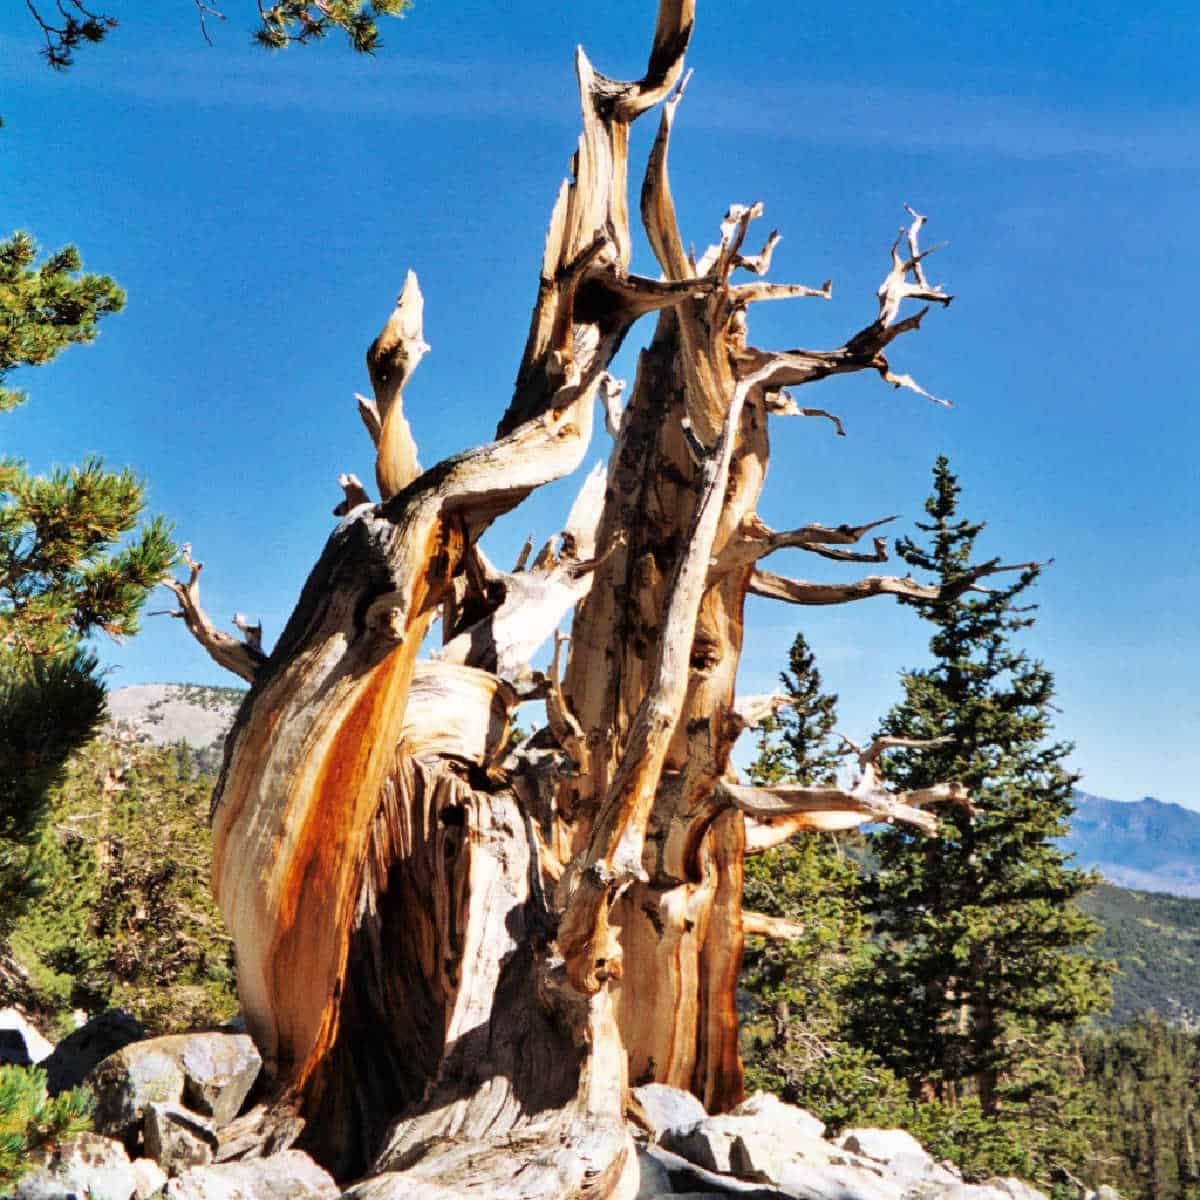 Bristlecone Pine Tree at Great Basin National Park in Nevada